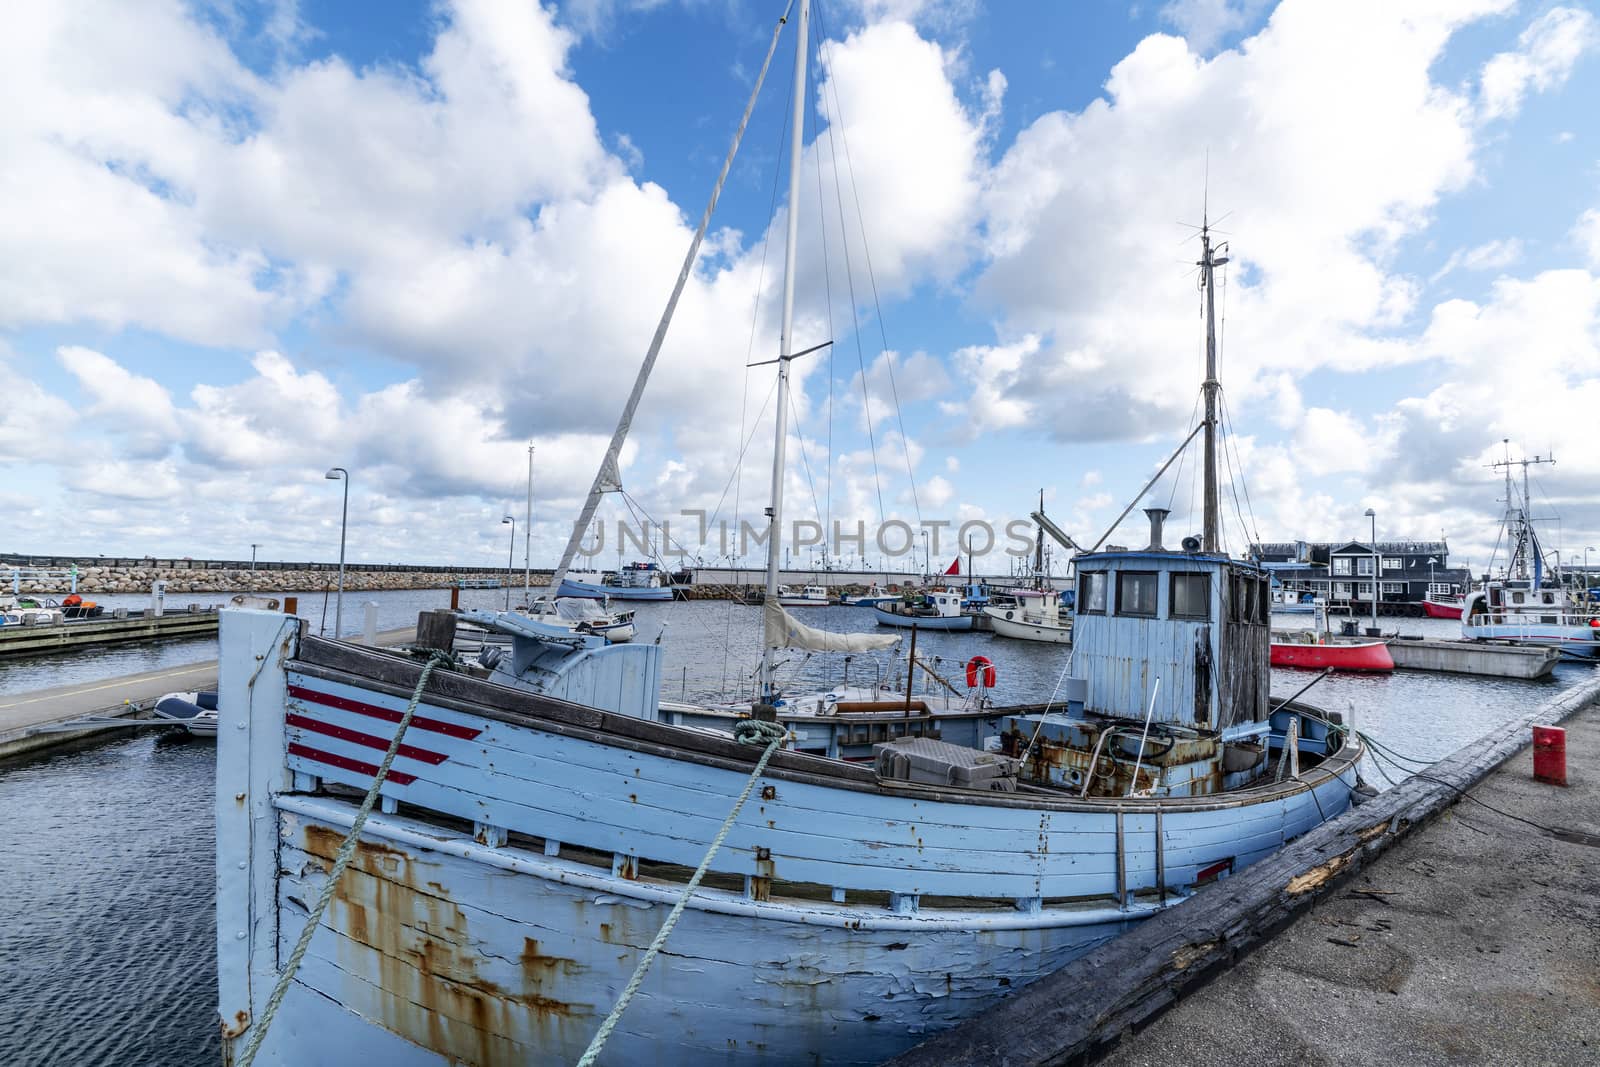 Old traditional fishing boat in a Scandinavian harbor under a cloudy blue sky